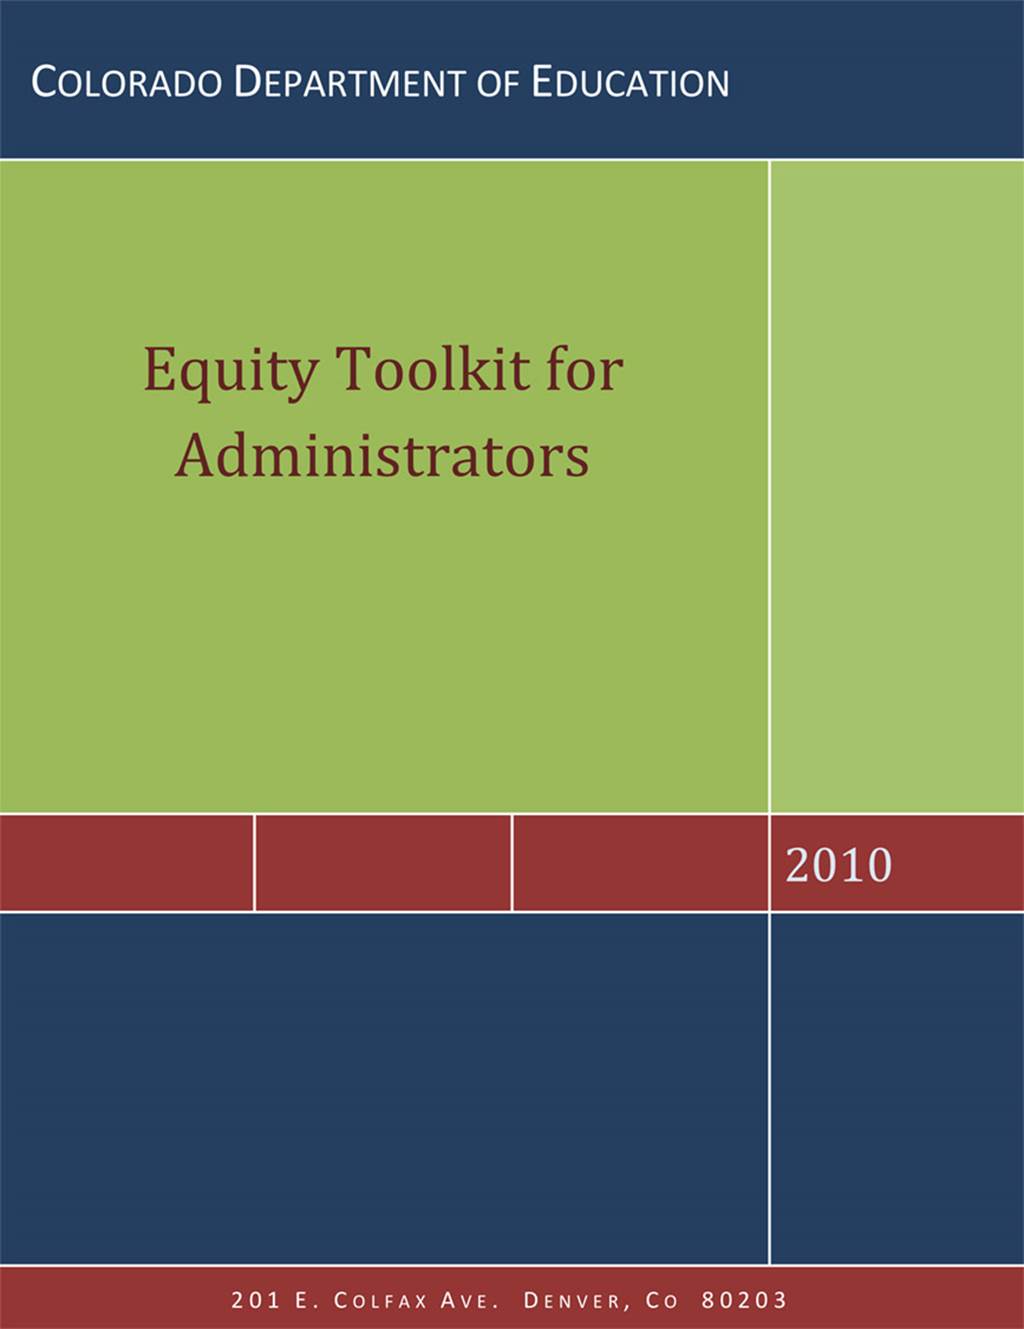 Equity Toolkit for Administrators - image